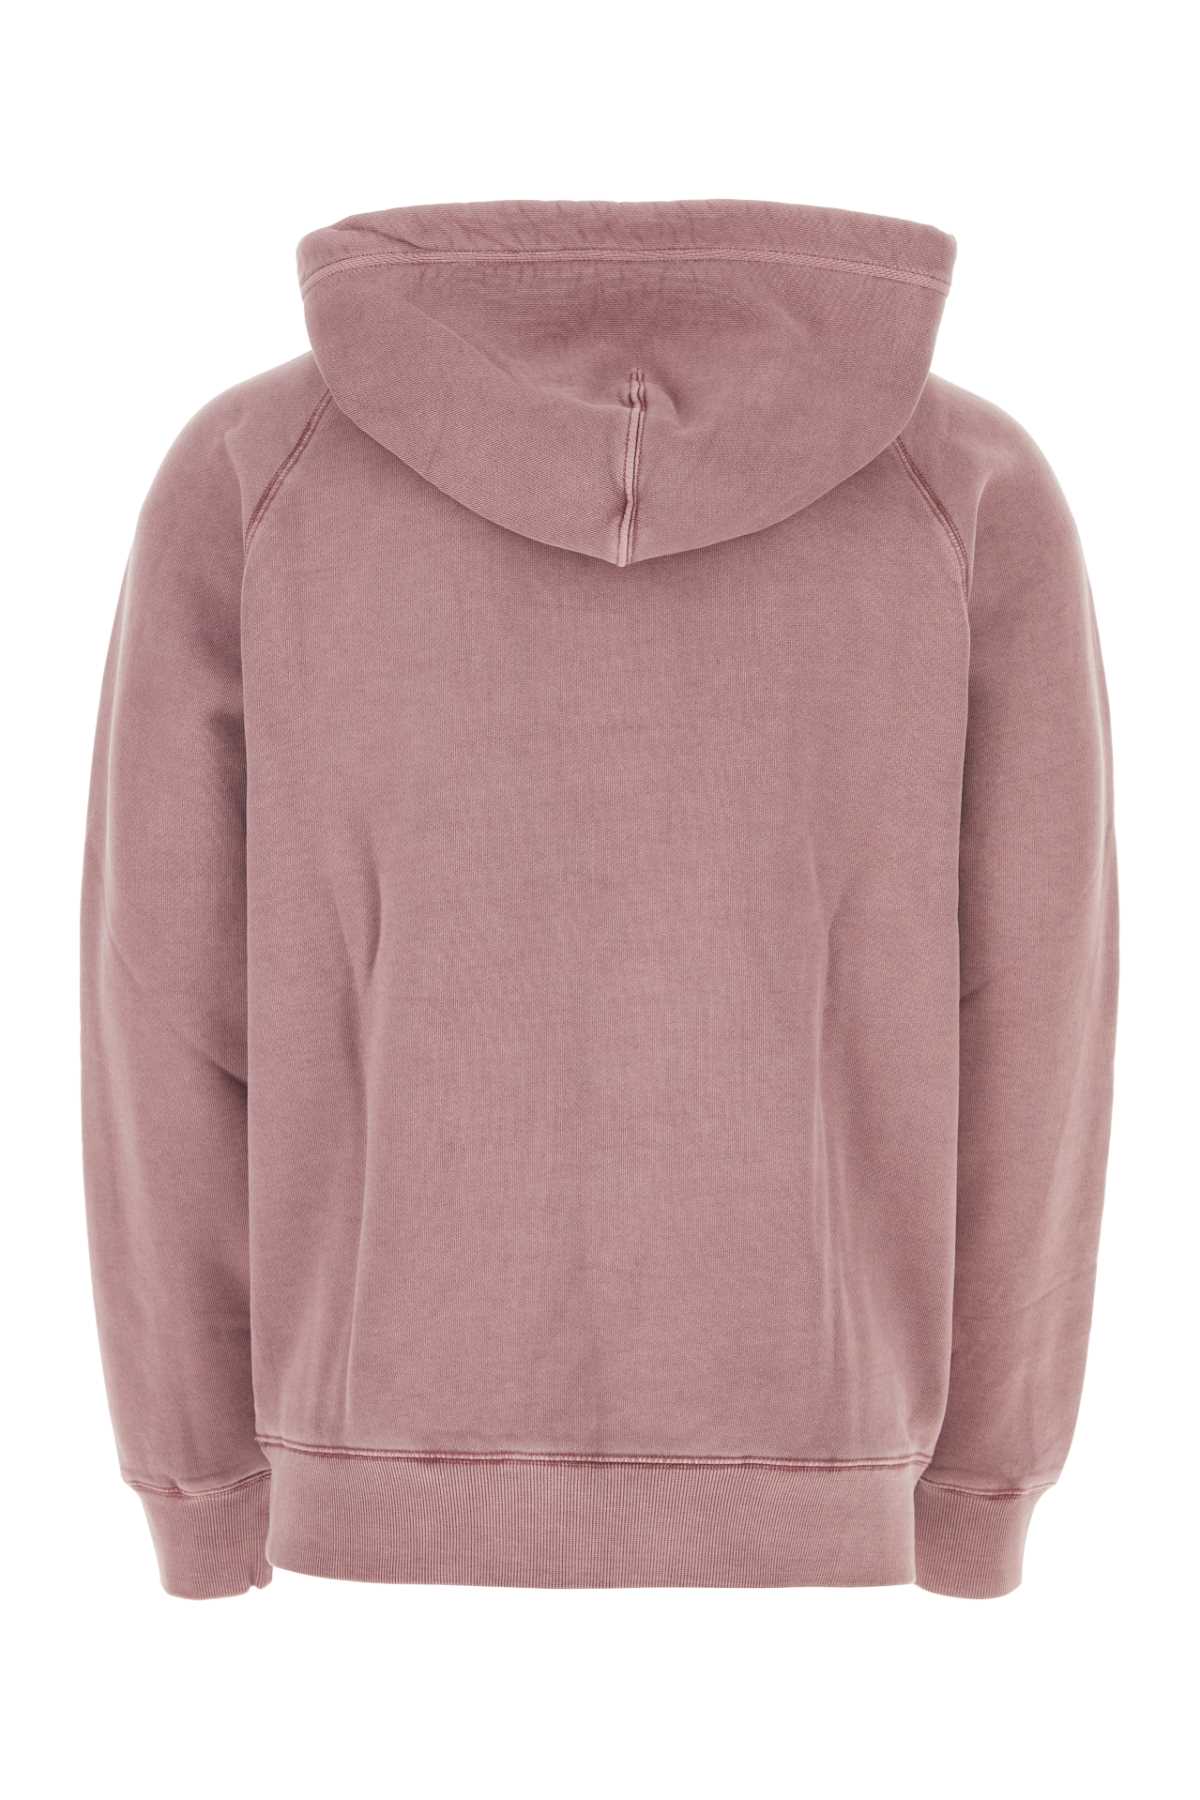 Carhartt Antiqued Pink Cotton Hooded Taos Sweat In Blk